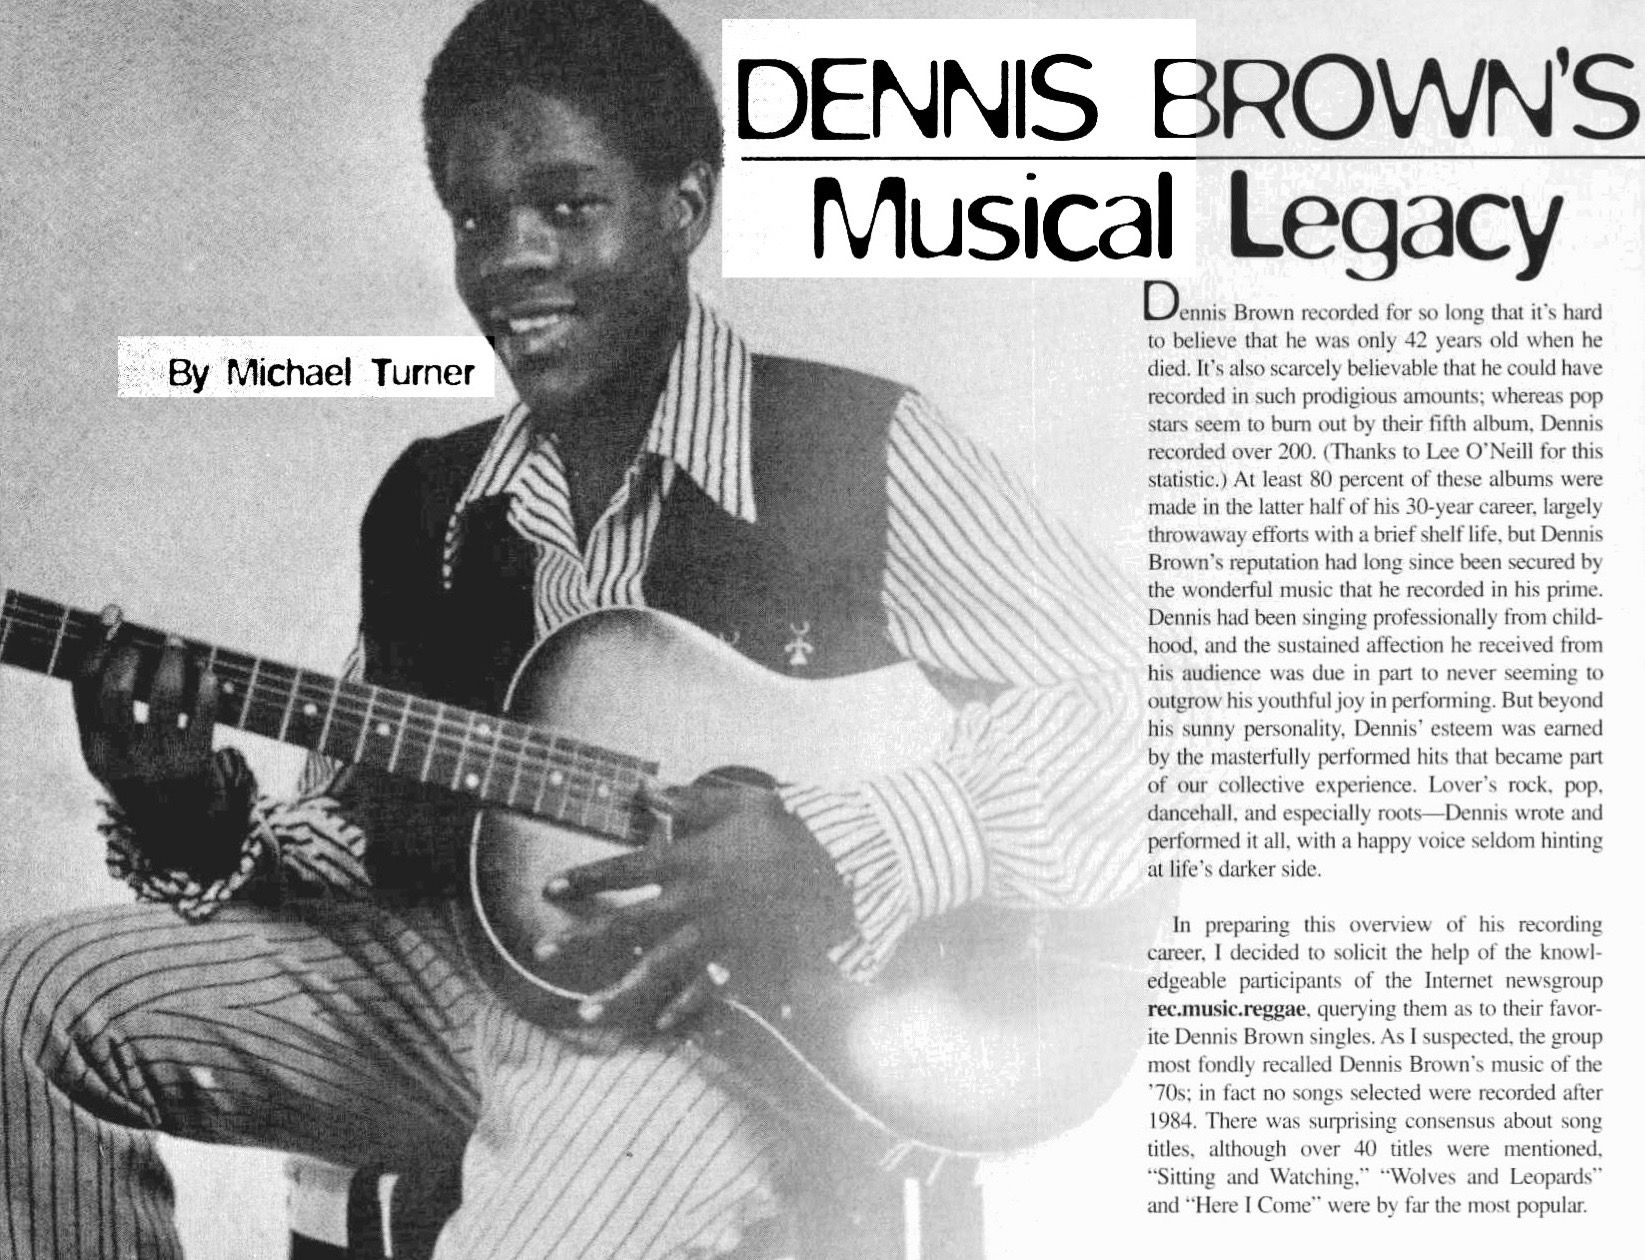 Best of The Beat on Afropop: Remembering Dennis Brown, Part Two